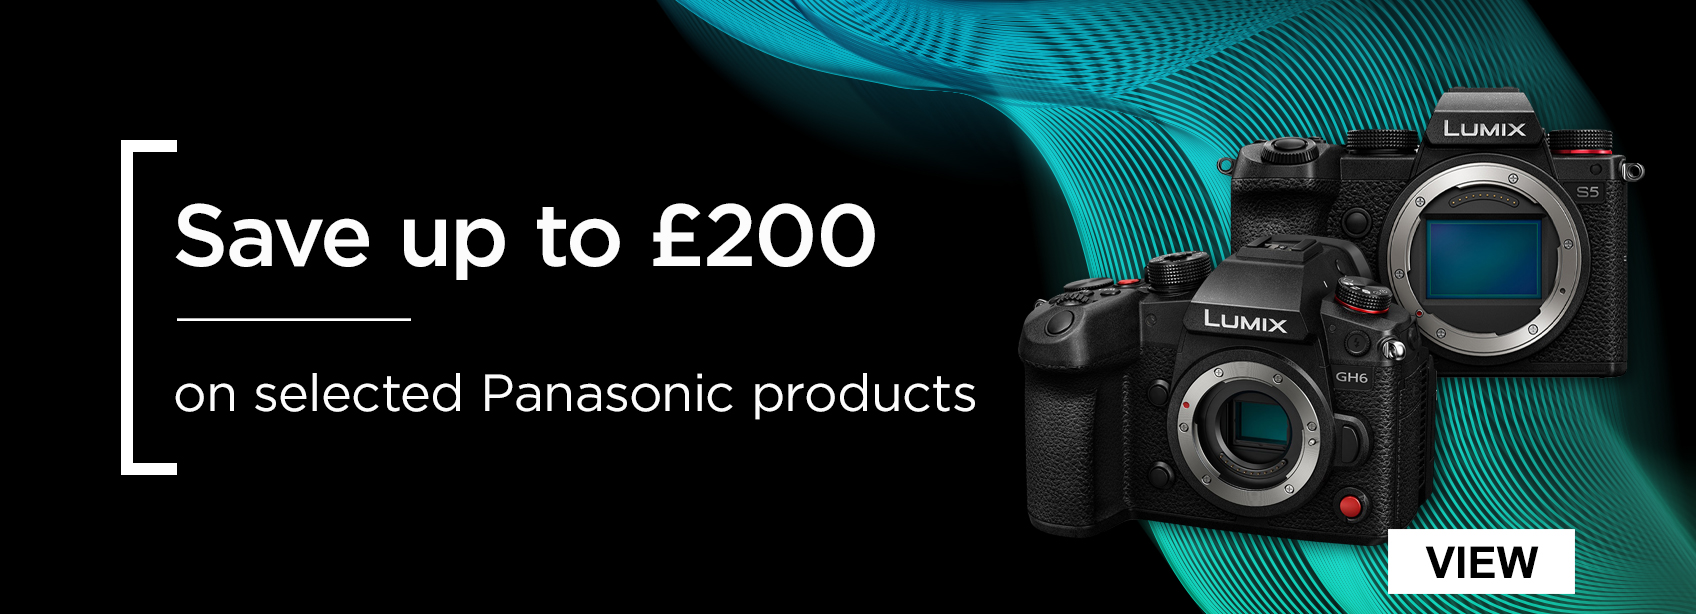 Save up to £200 on selected Panasonic products